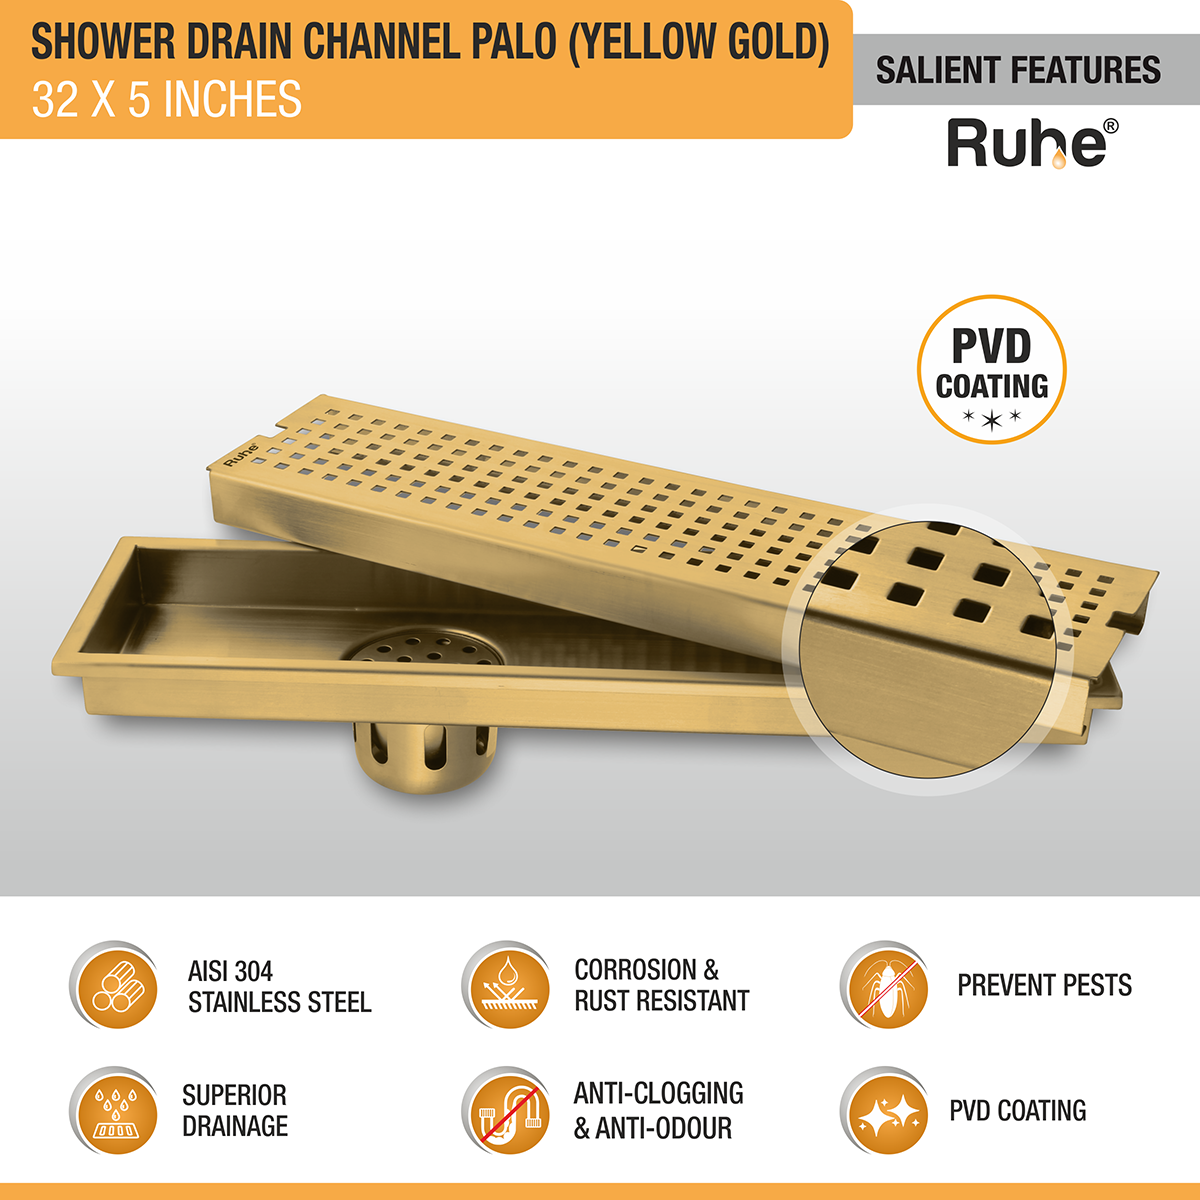 Palo Shower Drain Channel (32 x 5 Inches) YELLOW GOLD features